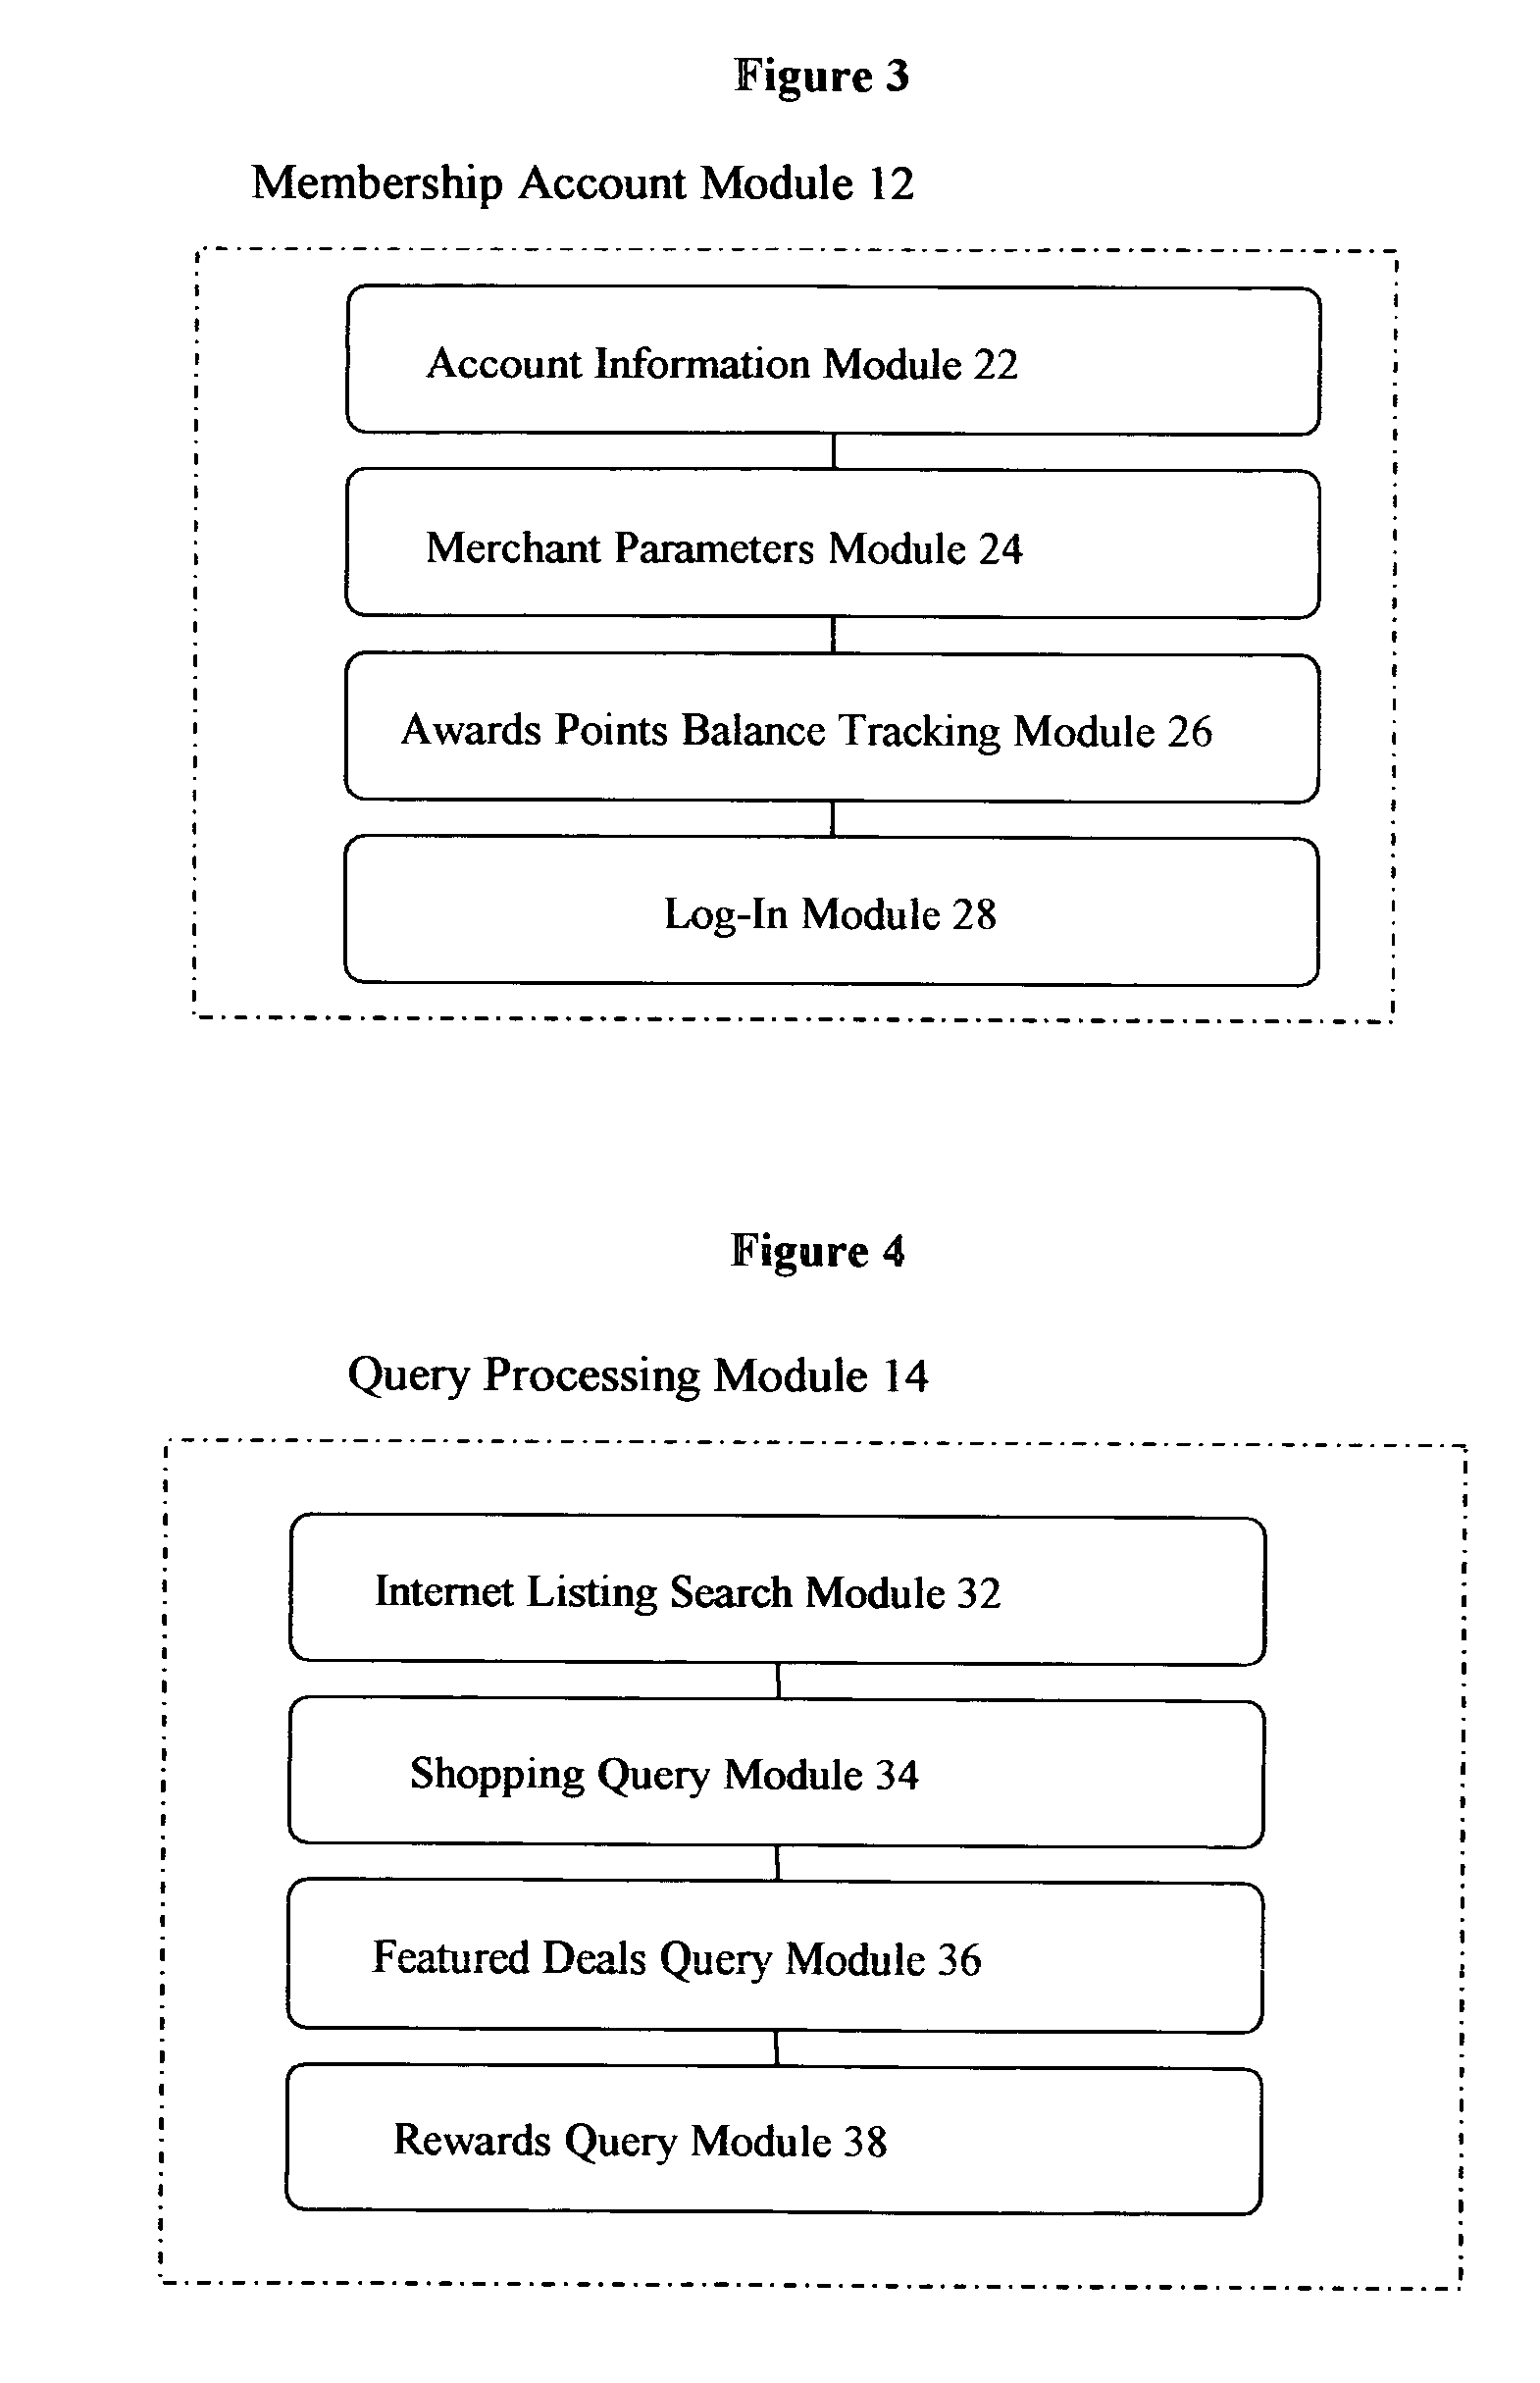 Combined search engine and consumer incentive advertising system and method